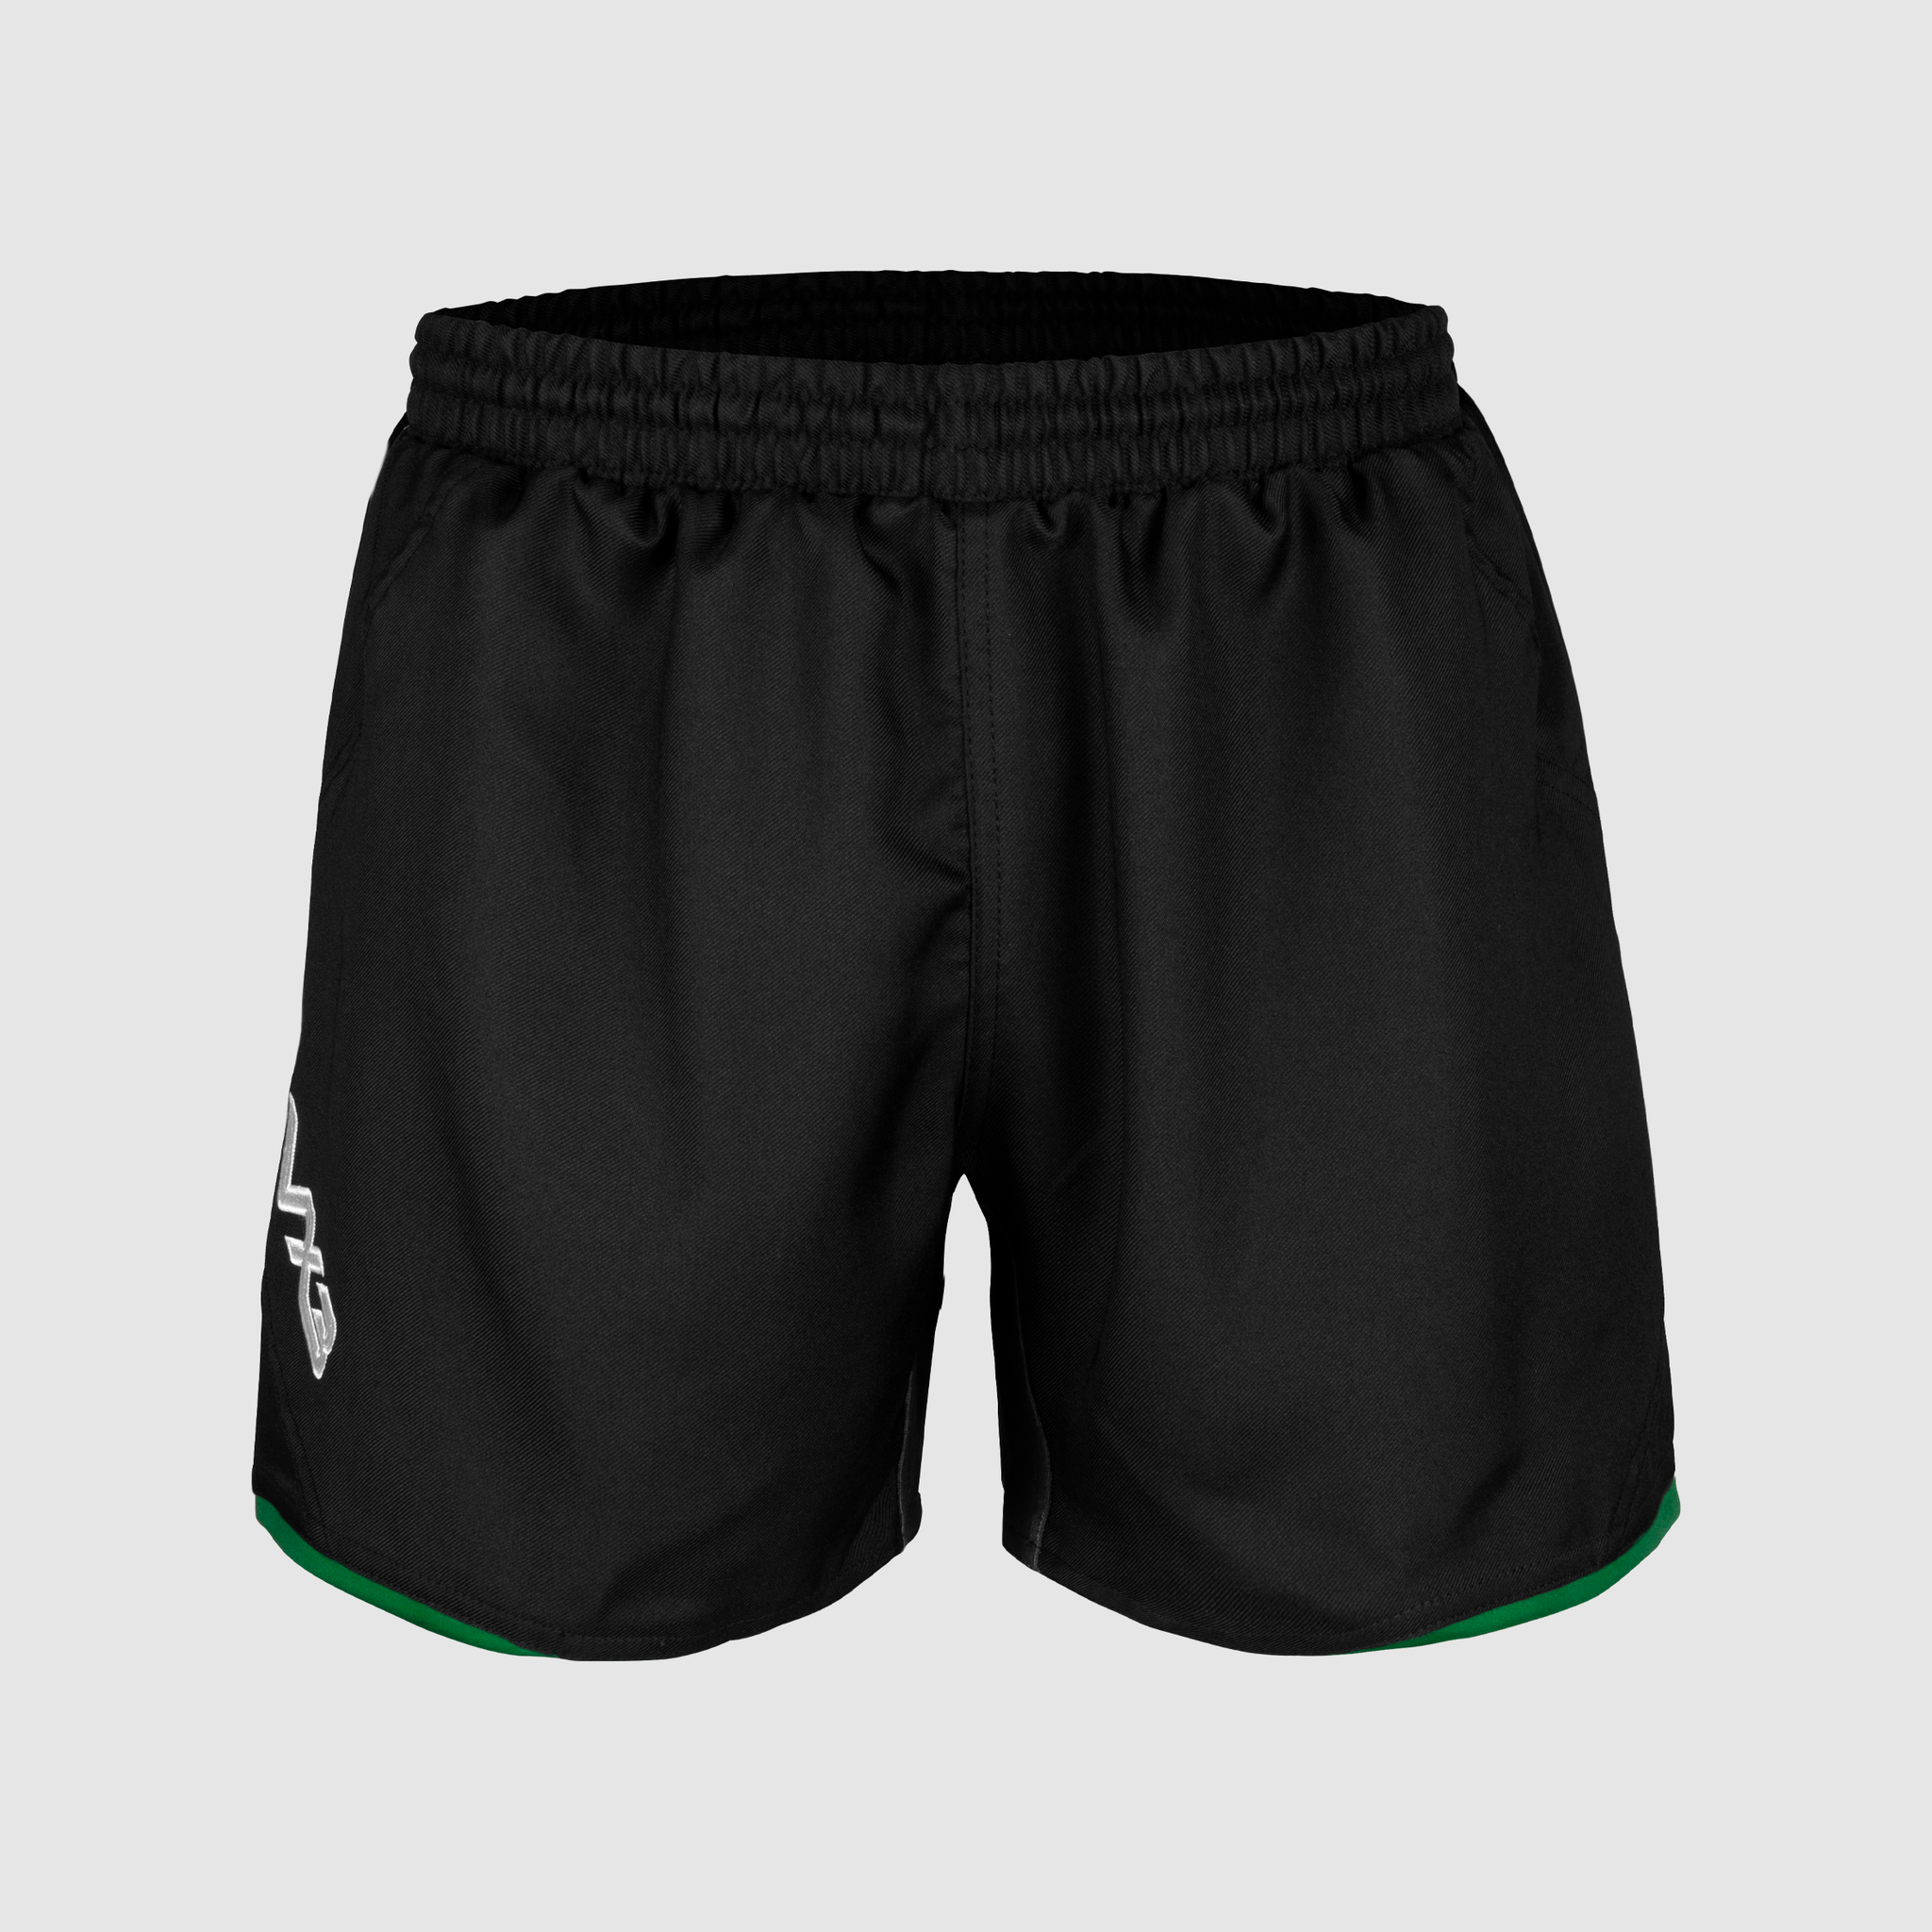 Prima Youth Rugby Shorts Black/Emerald